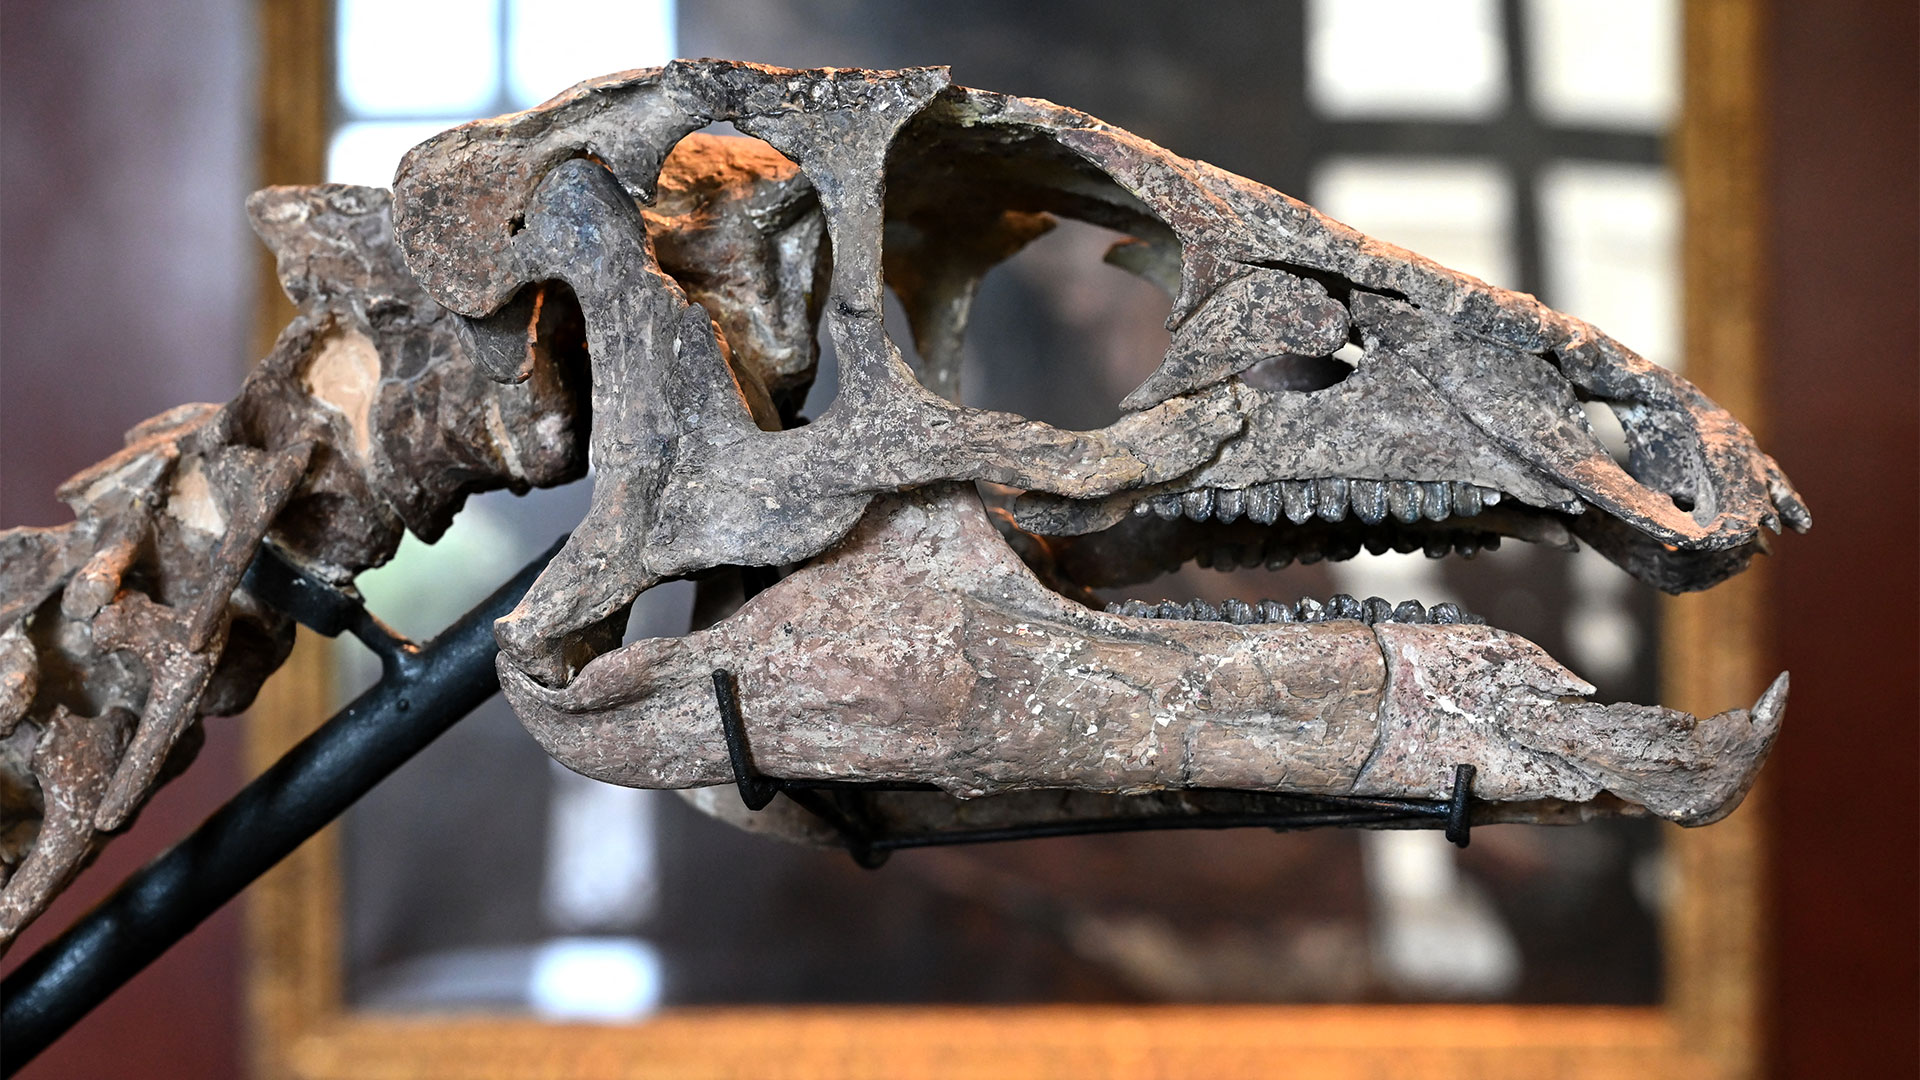 Lizards probably predate dinosaurs, which first appeared around 230 million years ago, during the Triassic period (AFP)